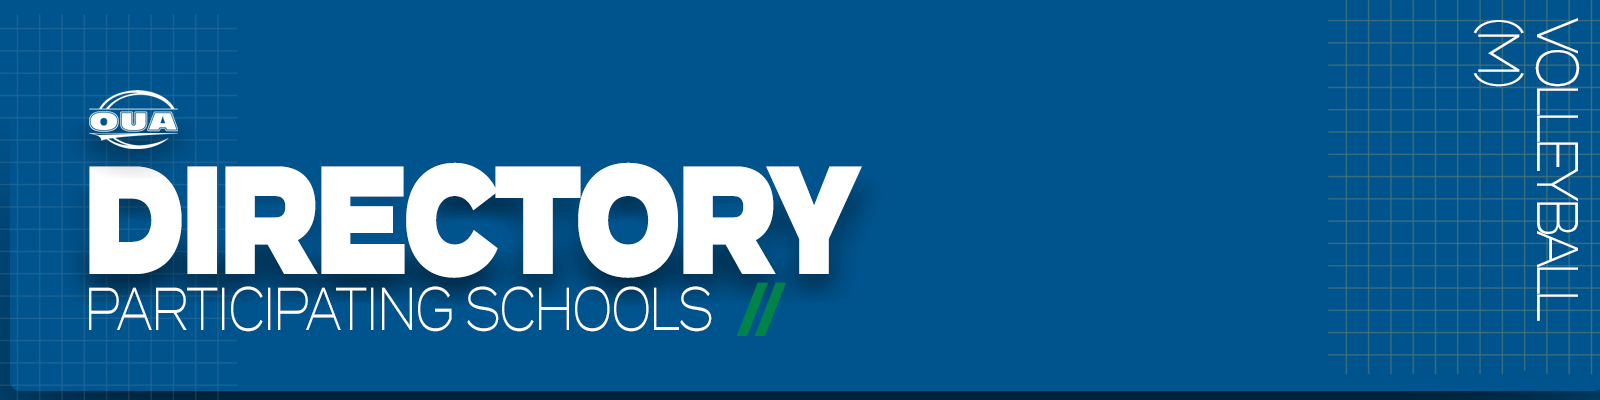 Predominantly blue graphic with large white text on the left side that reads 'Directory, Participating Schools' and small white vertical text on the right side that reads 'Volleyball M'